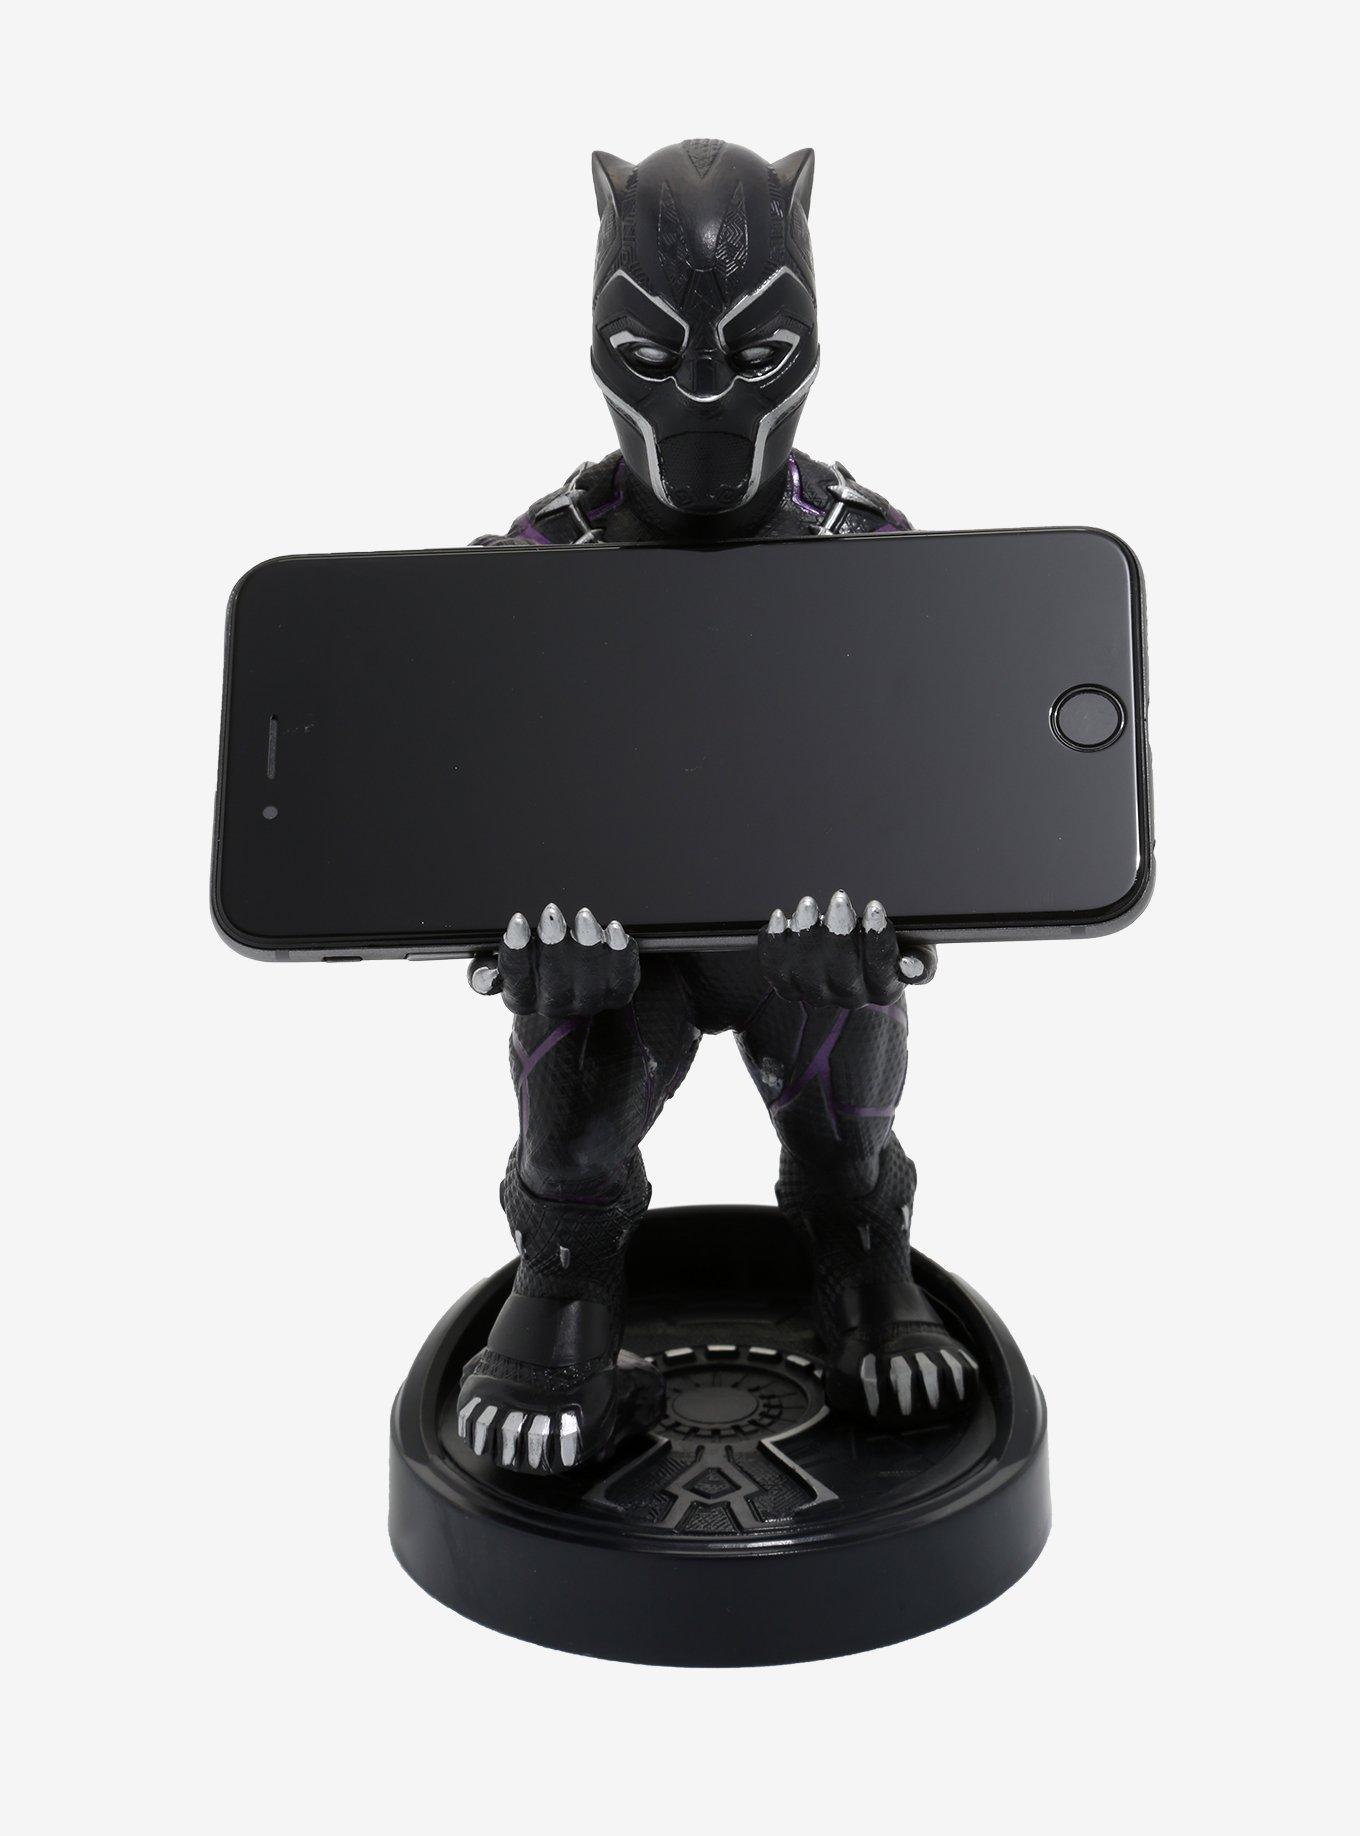 Exquisite Gaming Marvel Avengers: Endgame Cable Guys Black Panther Phone & Controller Holder, , hi-res